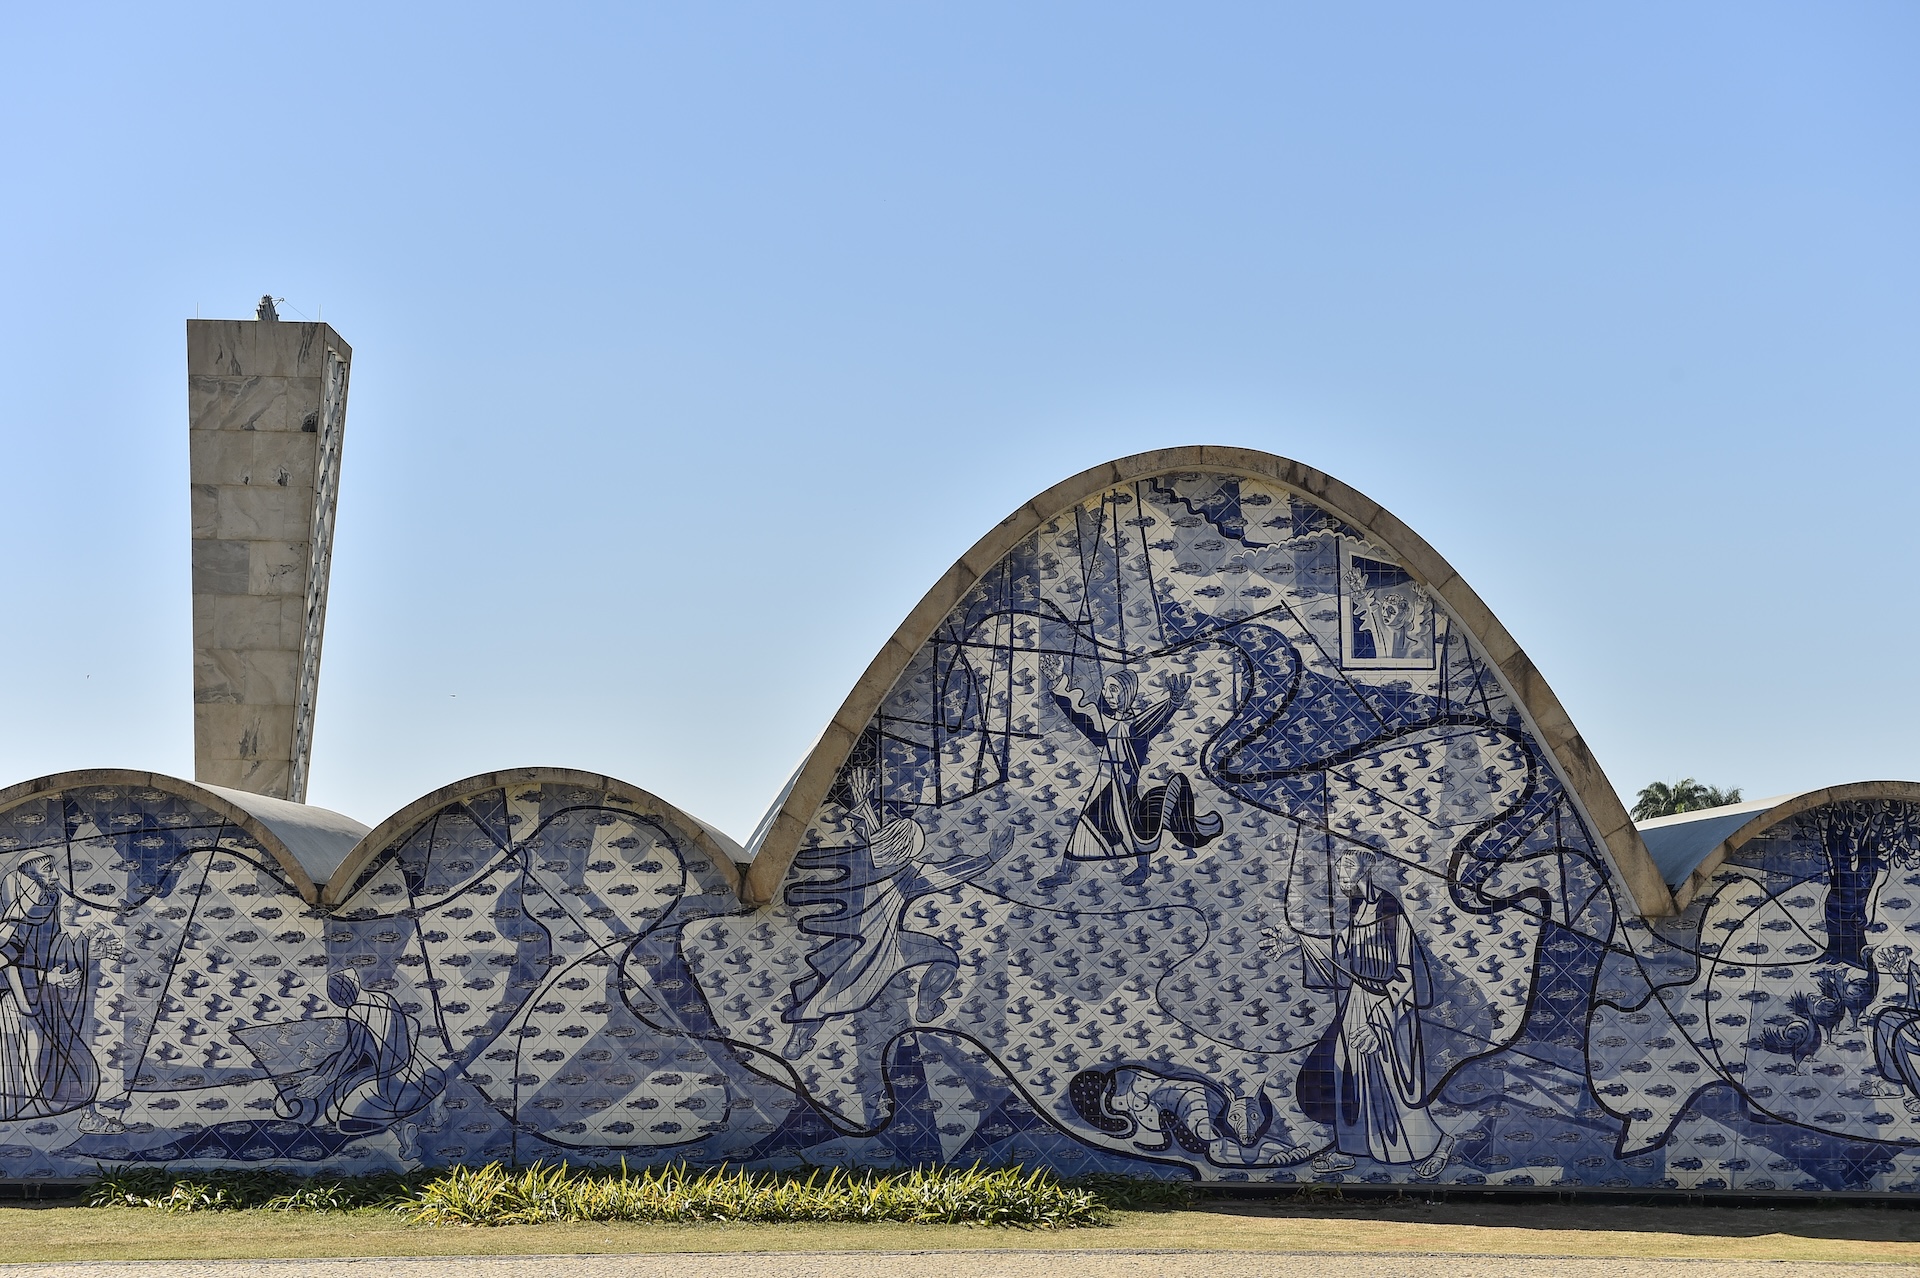 The São Francisco de Assis da Pampulha Church, in Belo Horizonte, Minas Gerais, was inaugurated in 1943. The architectural design was by Oscar Niemeyer, and the structural calculation by engineer Joaquim Cardozo. (Photo: Pedro Vilela/MTur)